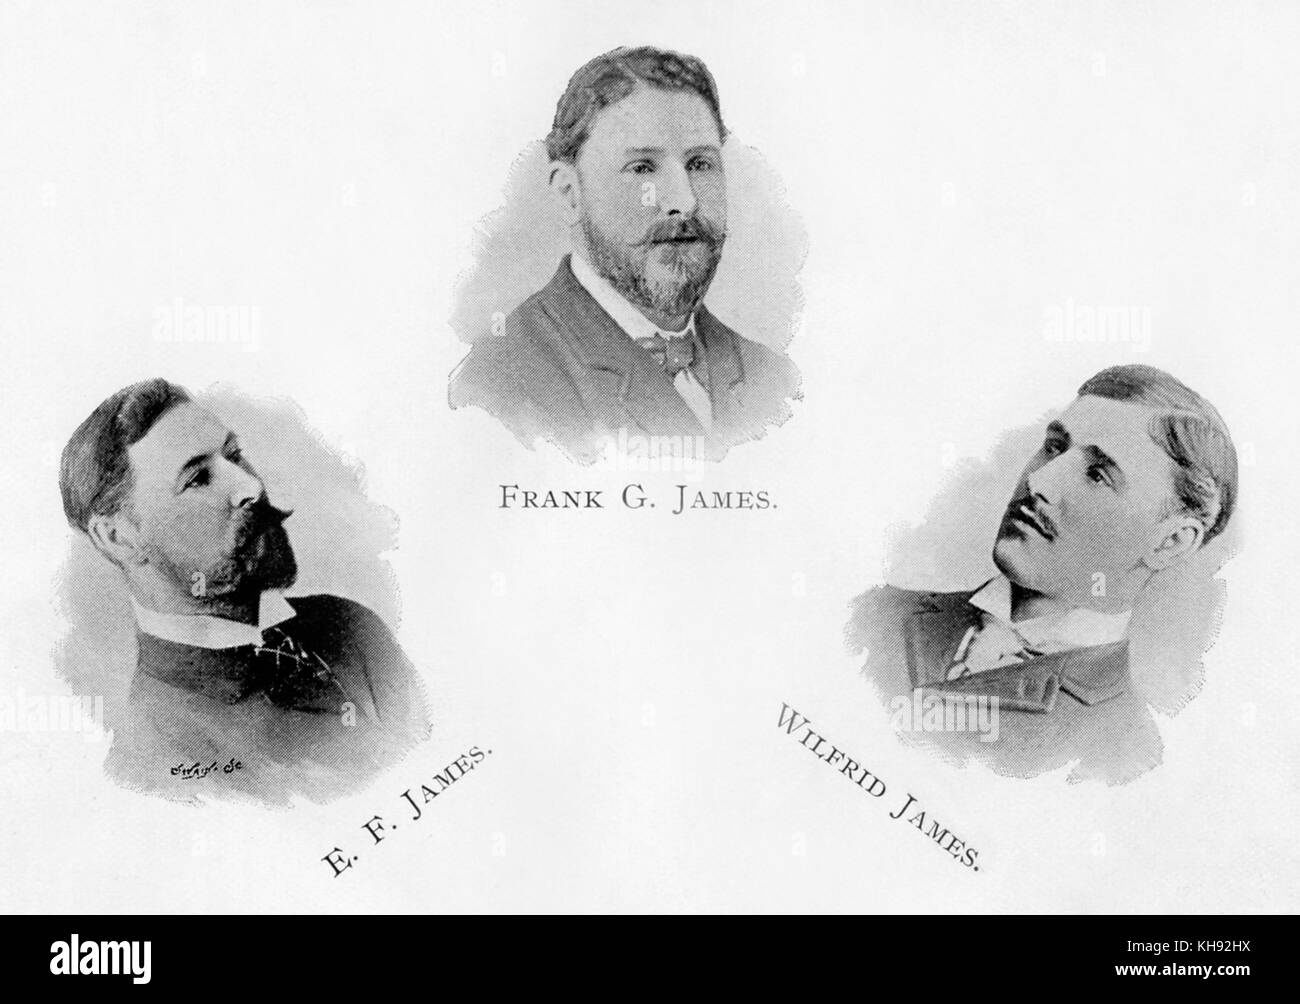 Edwin Frederick James, Frank Greenland James, Frank Greenland James and Wilfred James - Welsh bassoonist, trumpet and solo cornet player and bassoonist respectively. Brothers. Born: 16 February 1861; 30 September 1862; 5 March 1872. Stock Photo